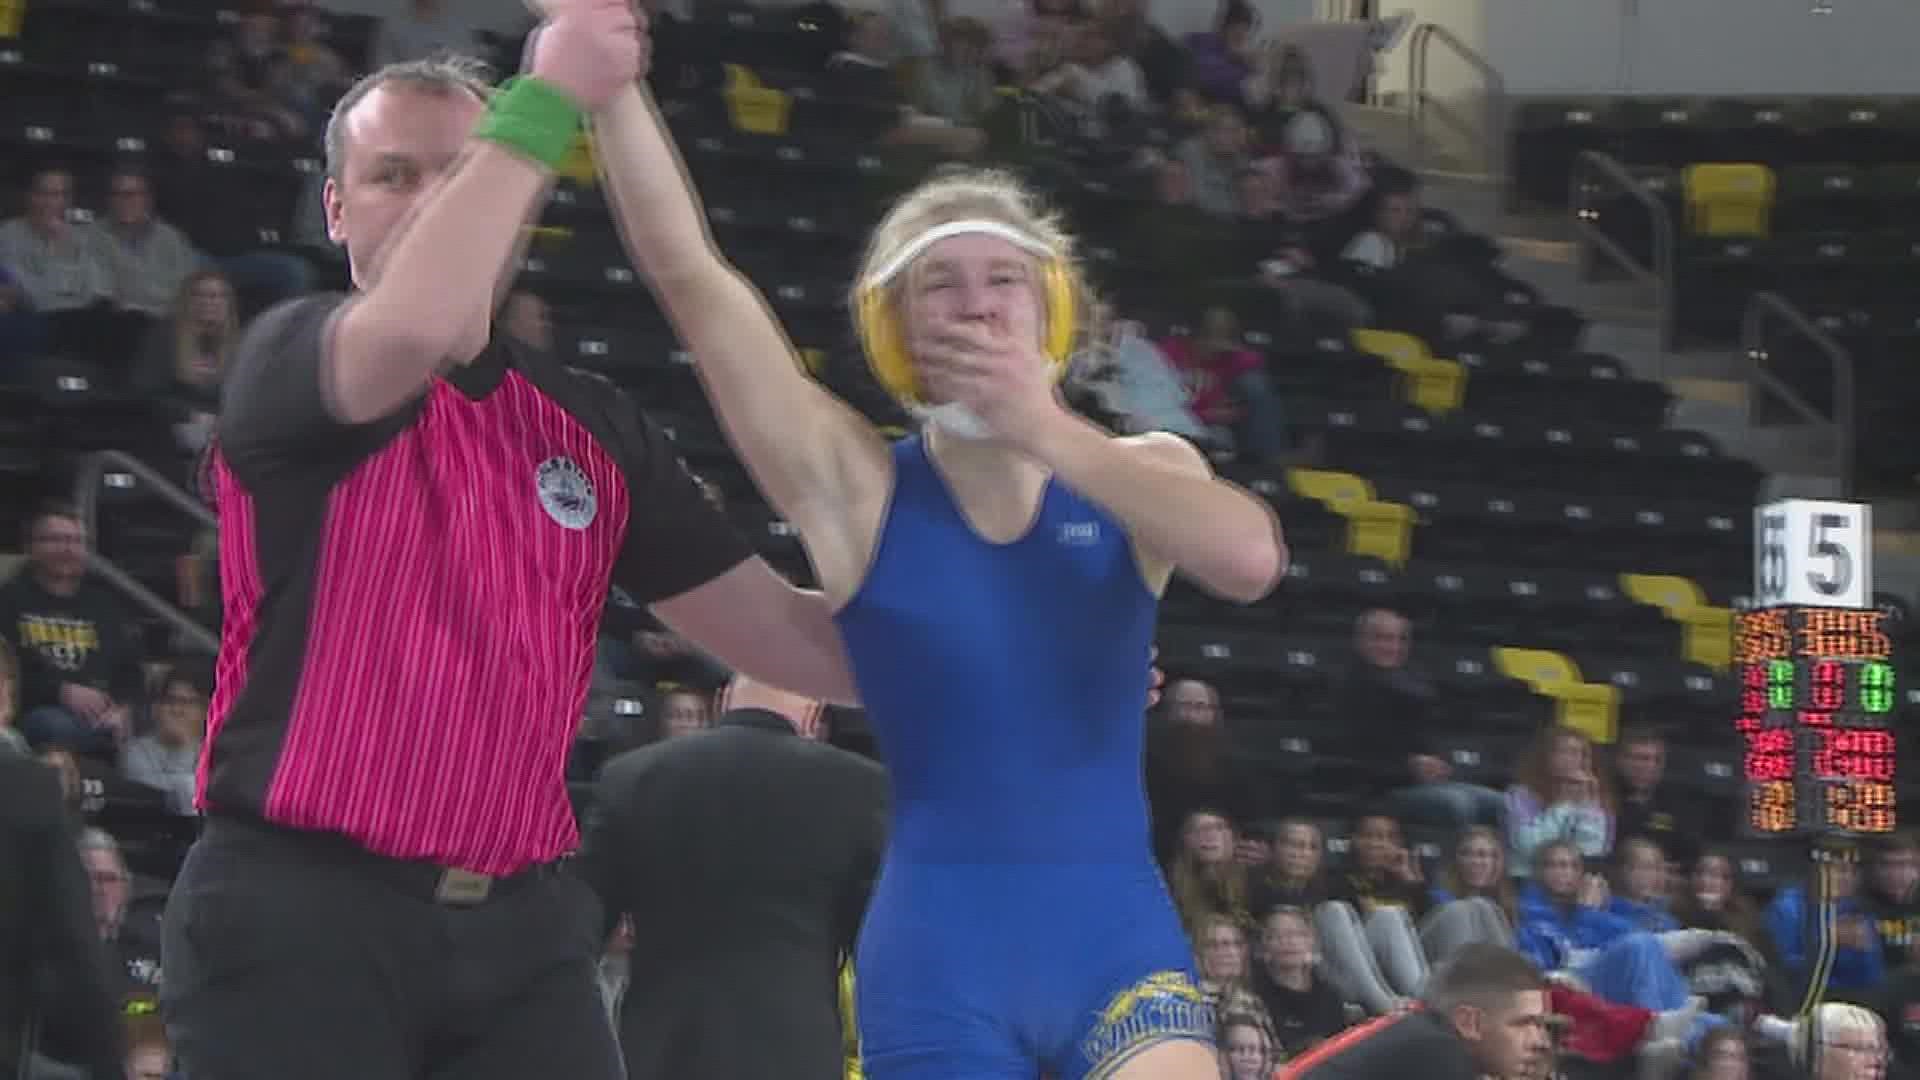 Girls Wrestling finally gets sanctioned by the IGHSAU. As for the State Meet, Ella Schmit wins her third straight title, Hannah Rogers claims her first title.